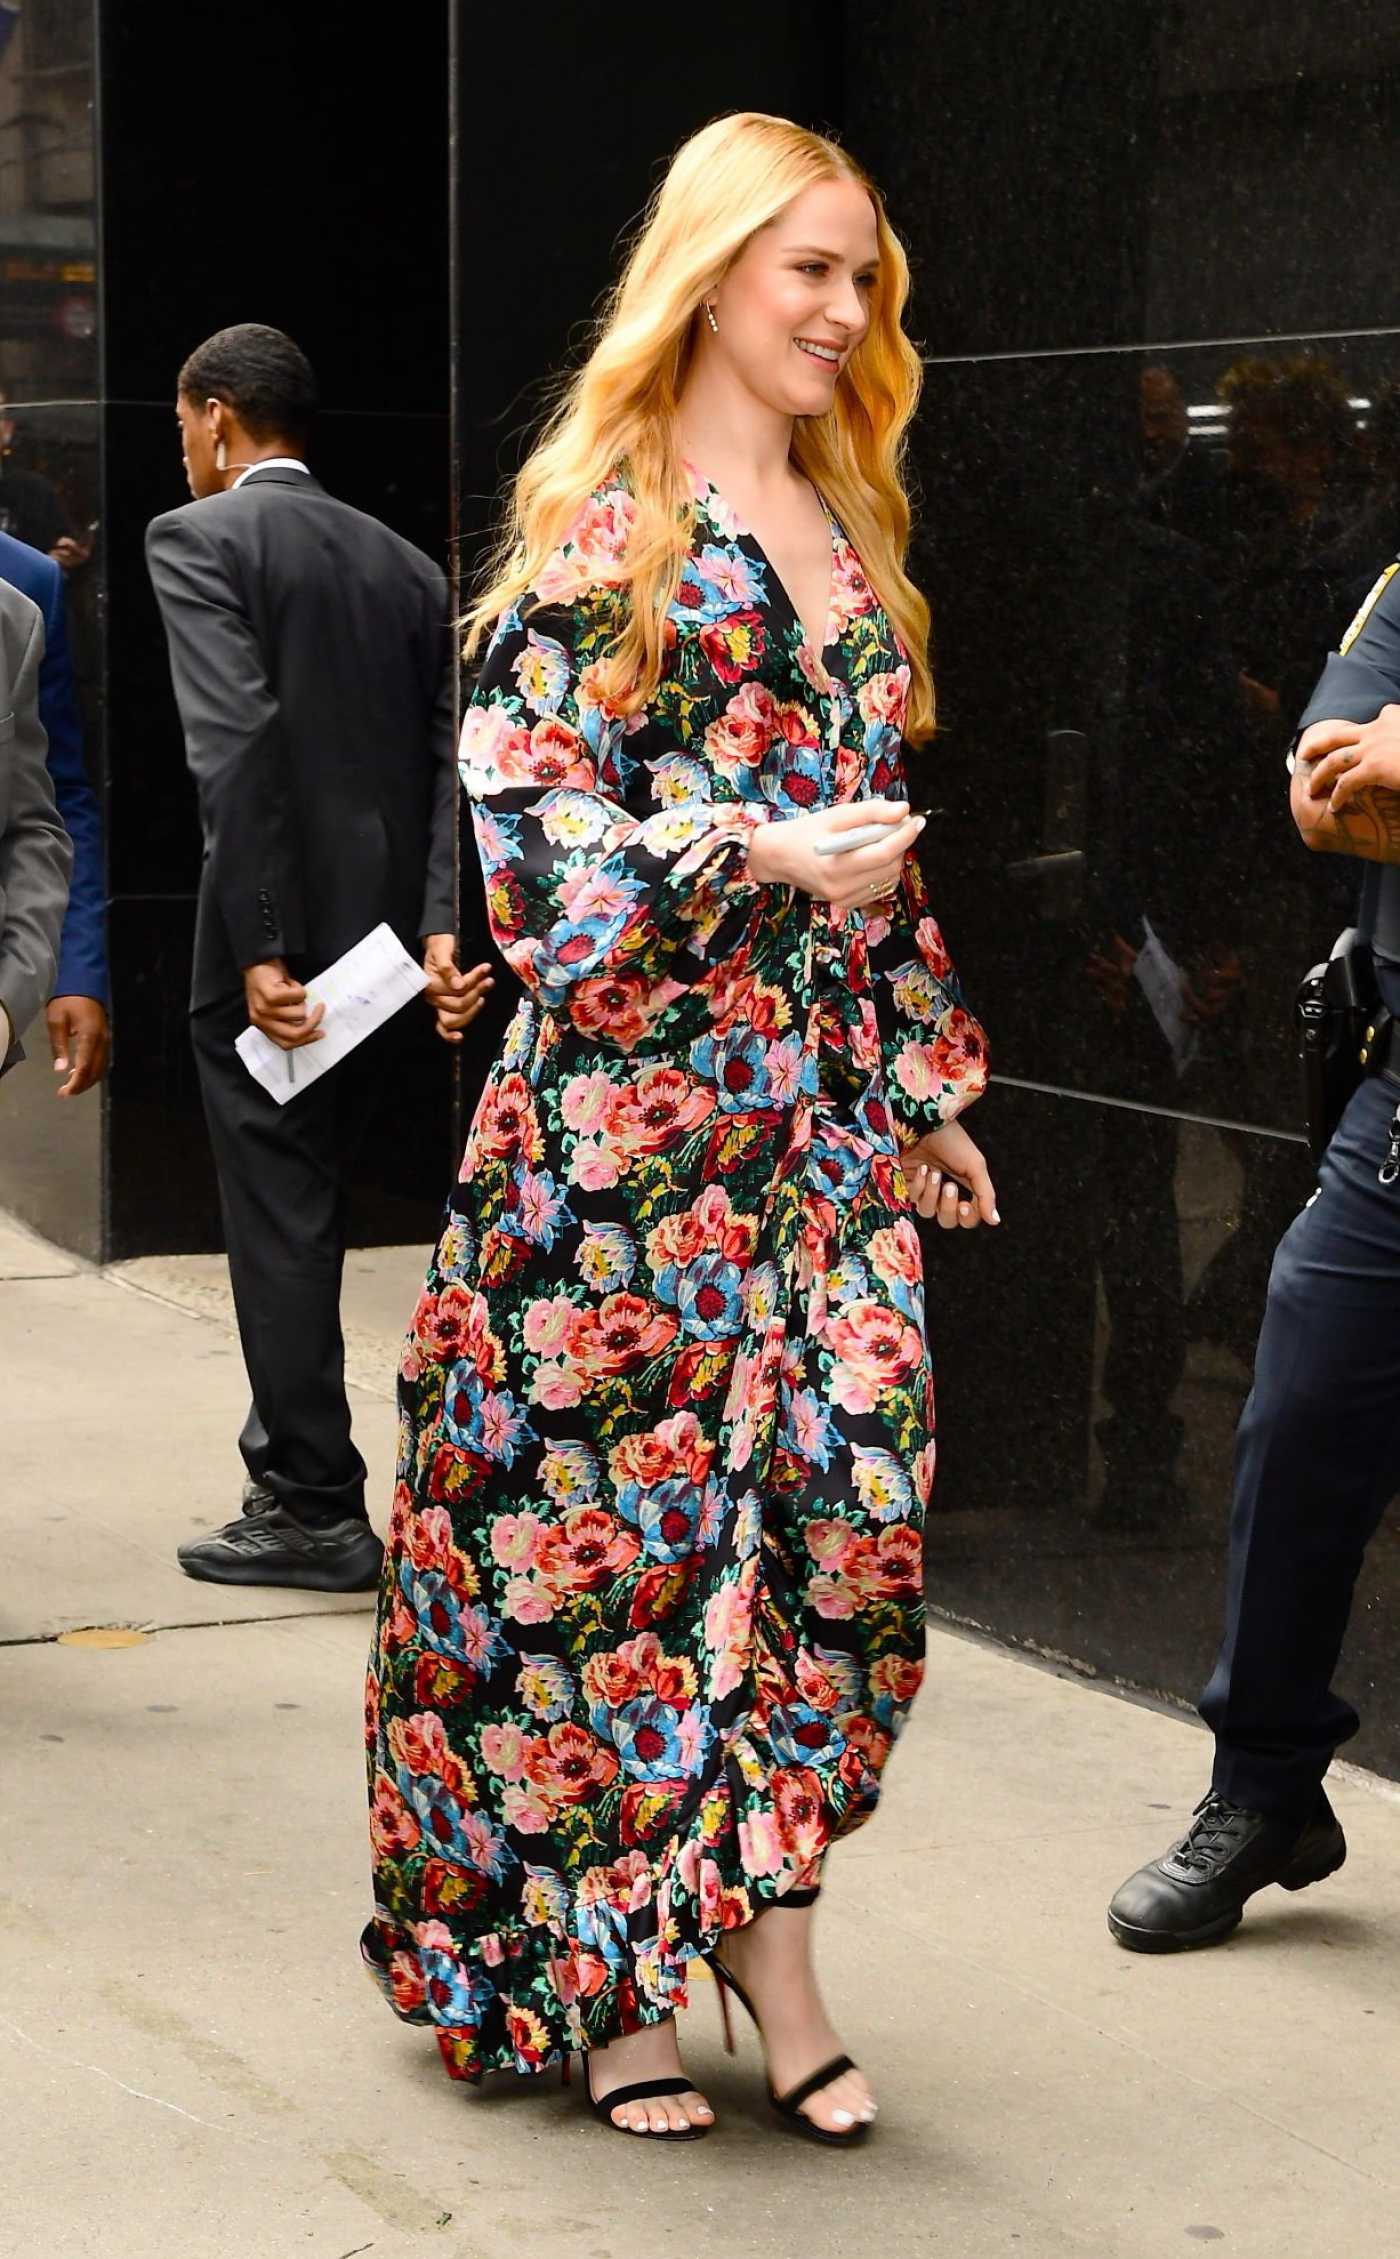 Evan Rachel Wood in a Floral Dress Arrives at the World Trade Center in New York City 06/21/2022